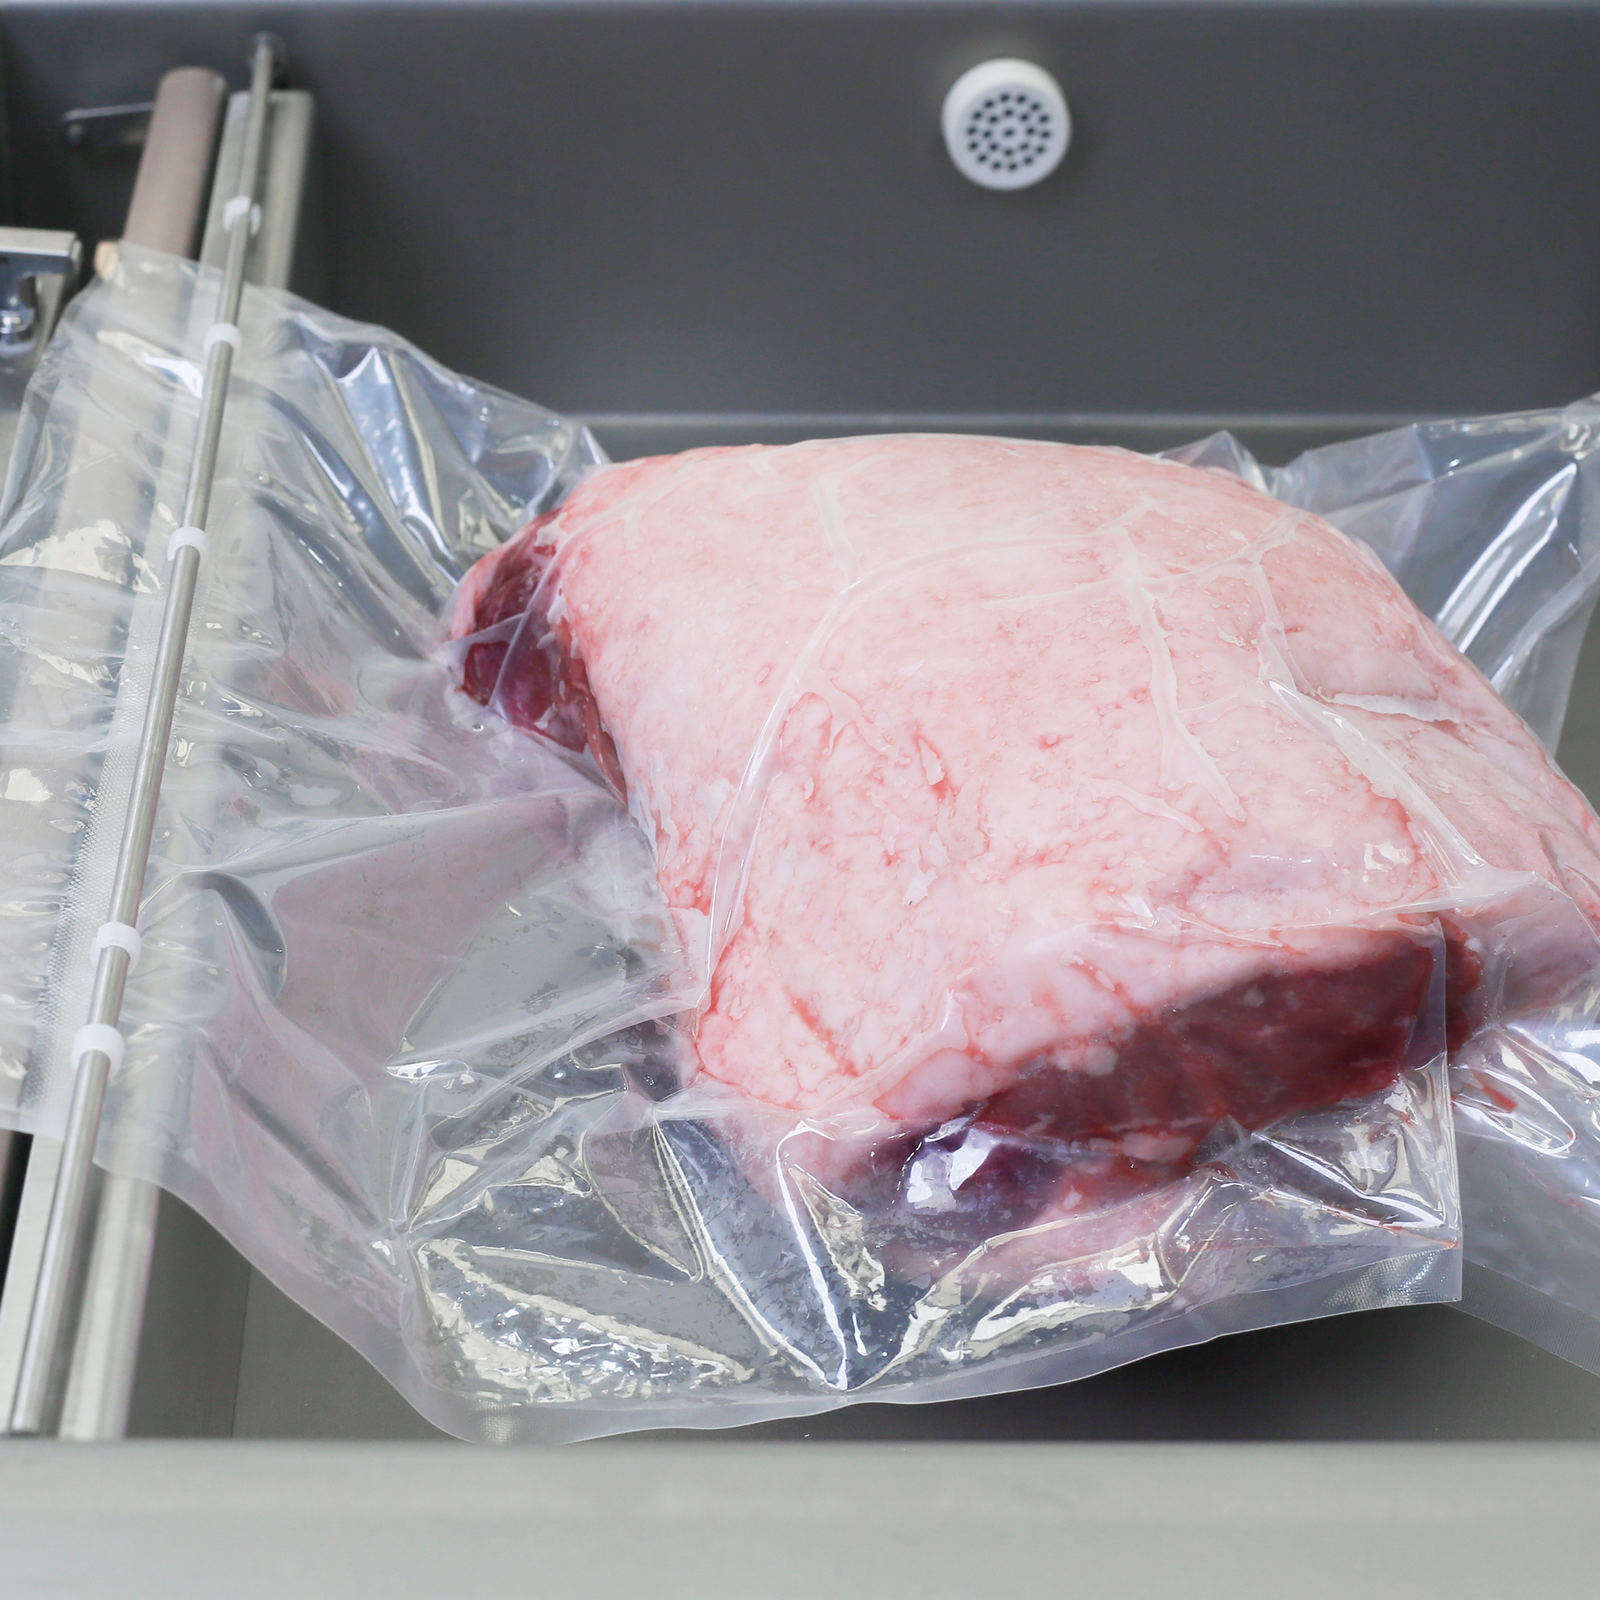 Vacuumed sealed bag with a large piece of meet inside. The bag is positioned inside chamber of the stainless steel JORES TECHNOLOGIES® tabletop commercial single chamber vacuum sealer with dual seal bar